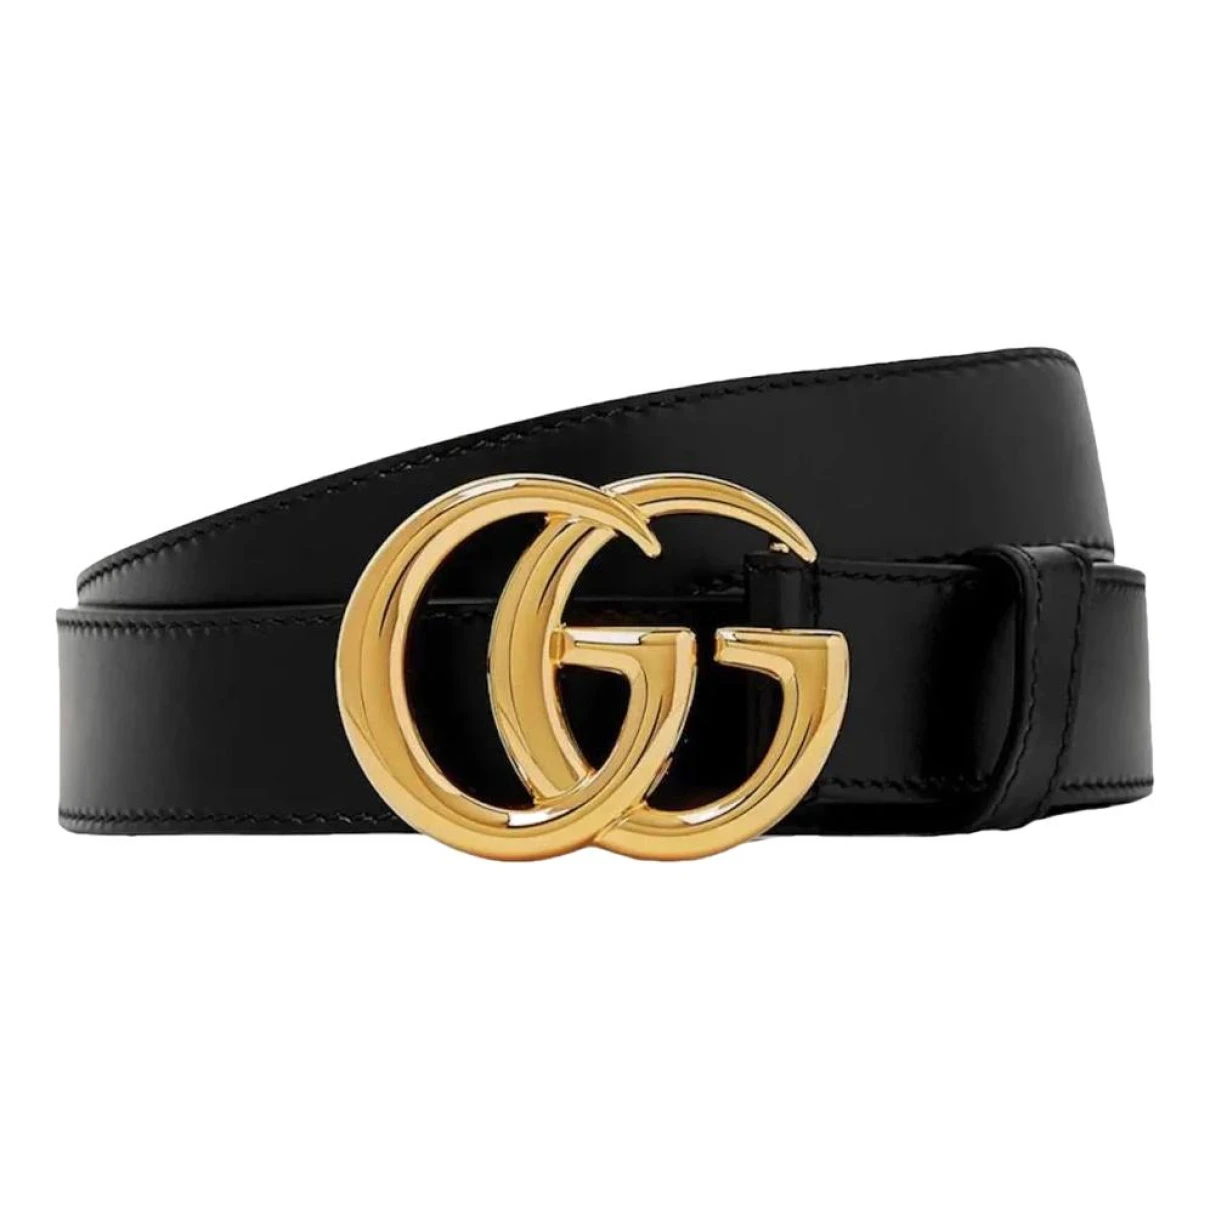 accessories Gucci belts for Female Leather 90 cm. Used condition